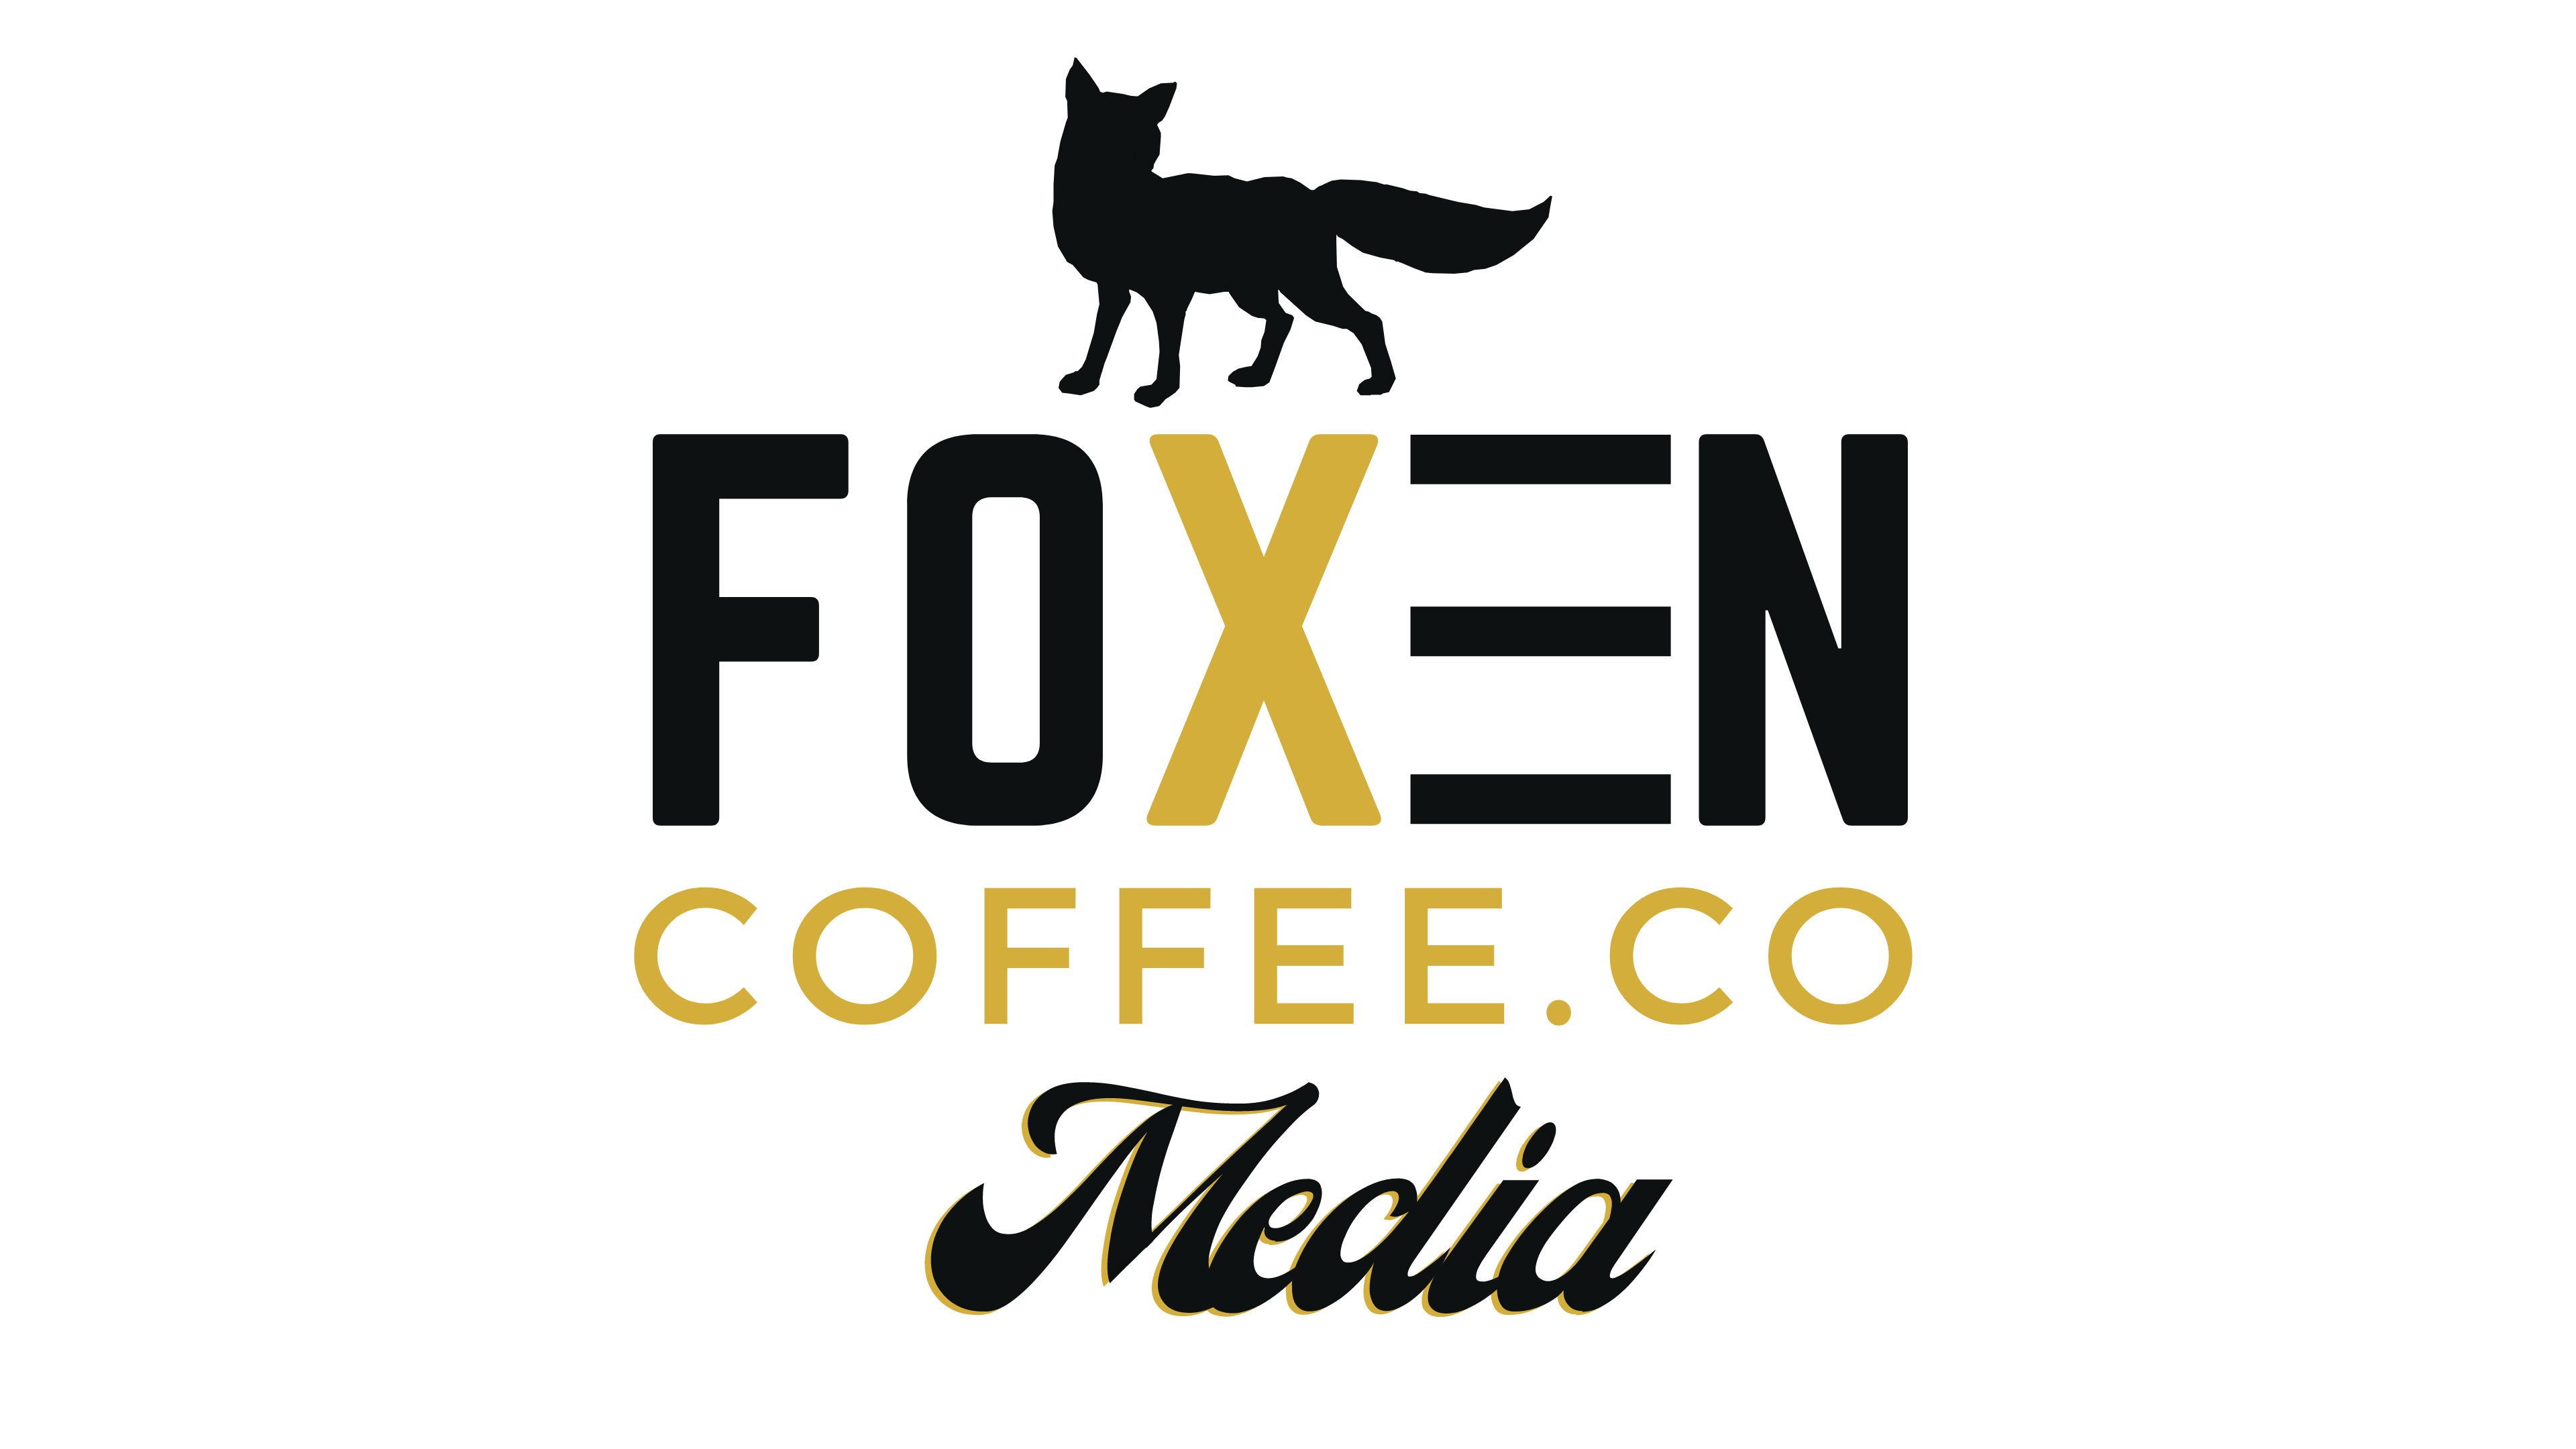 The Media of Foxen Coffee